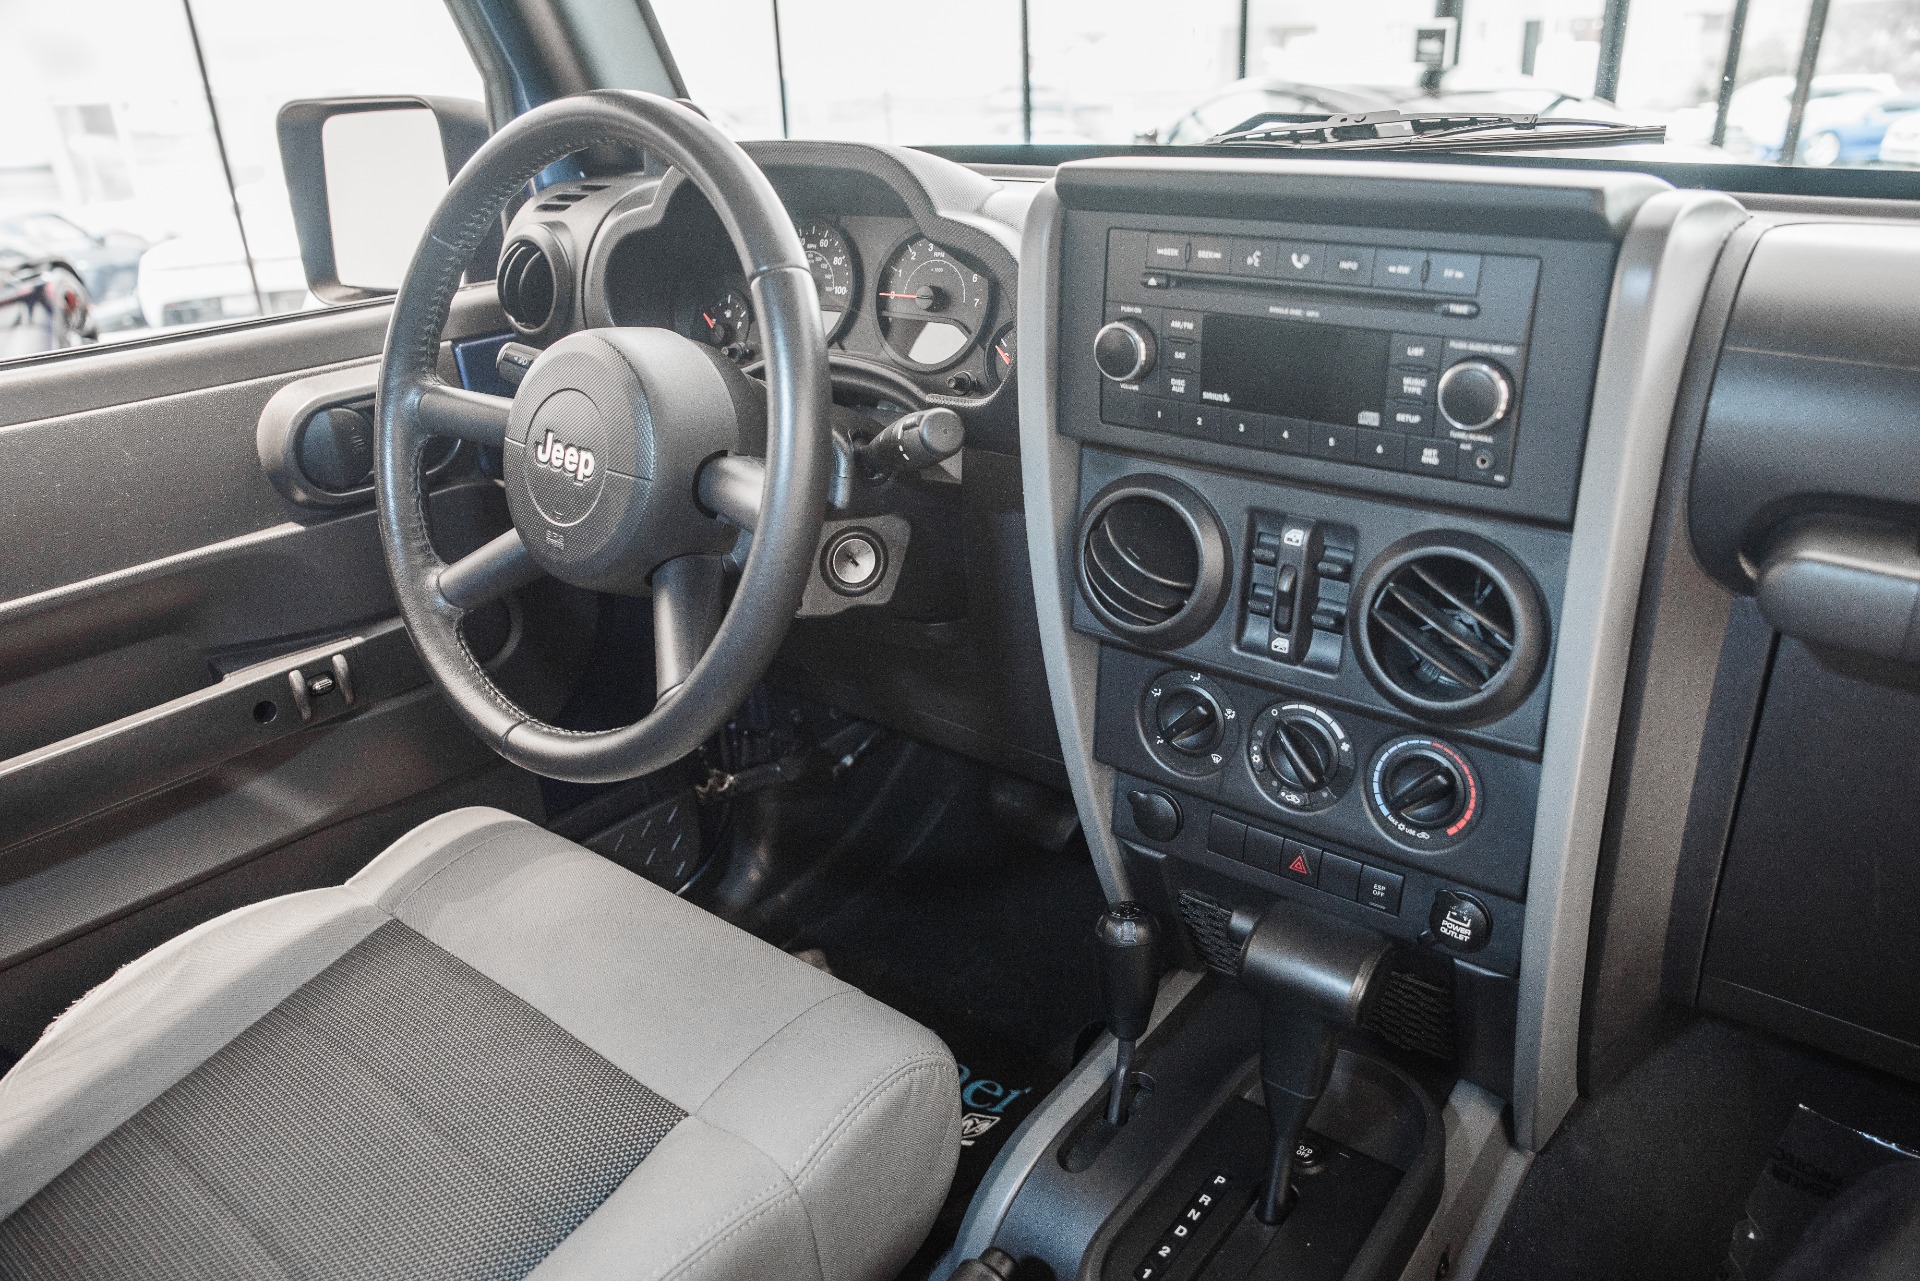 Used 2009 Jeep Wrangler Unlimited X For Sale (Sold) | Aston Martin  Washington DC Stock #P715387